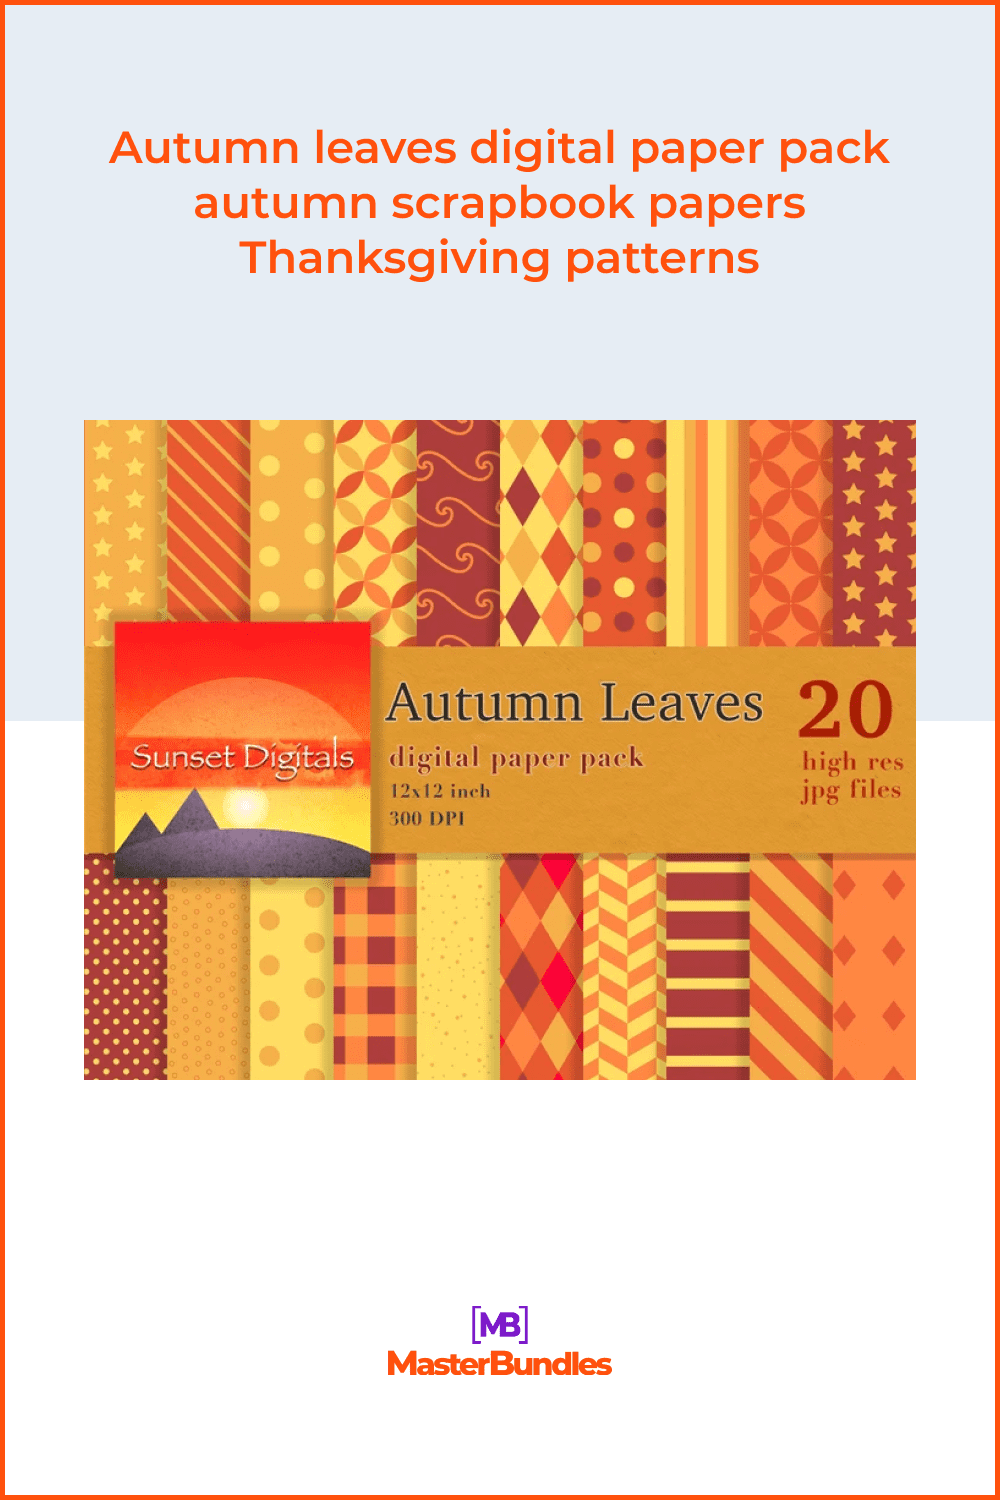 Autumn leaves digital paper pack autumn scrapbook papers Thanksgiving patterns.